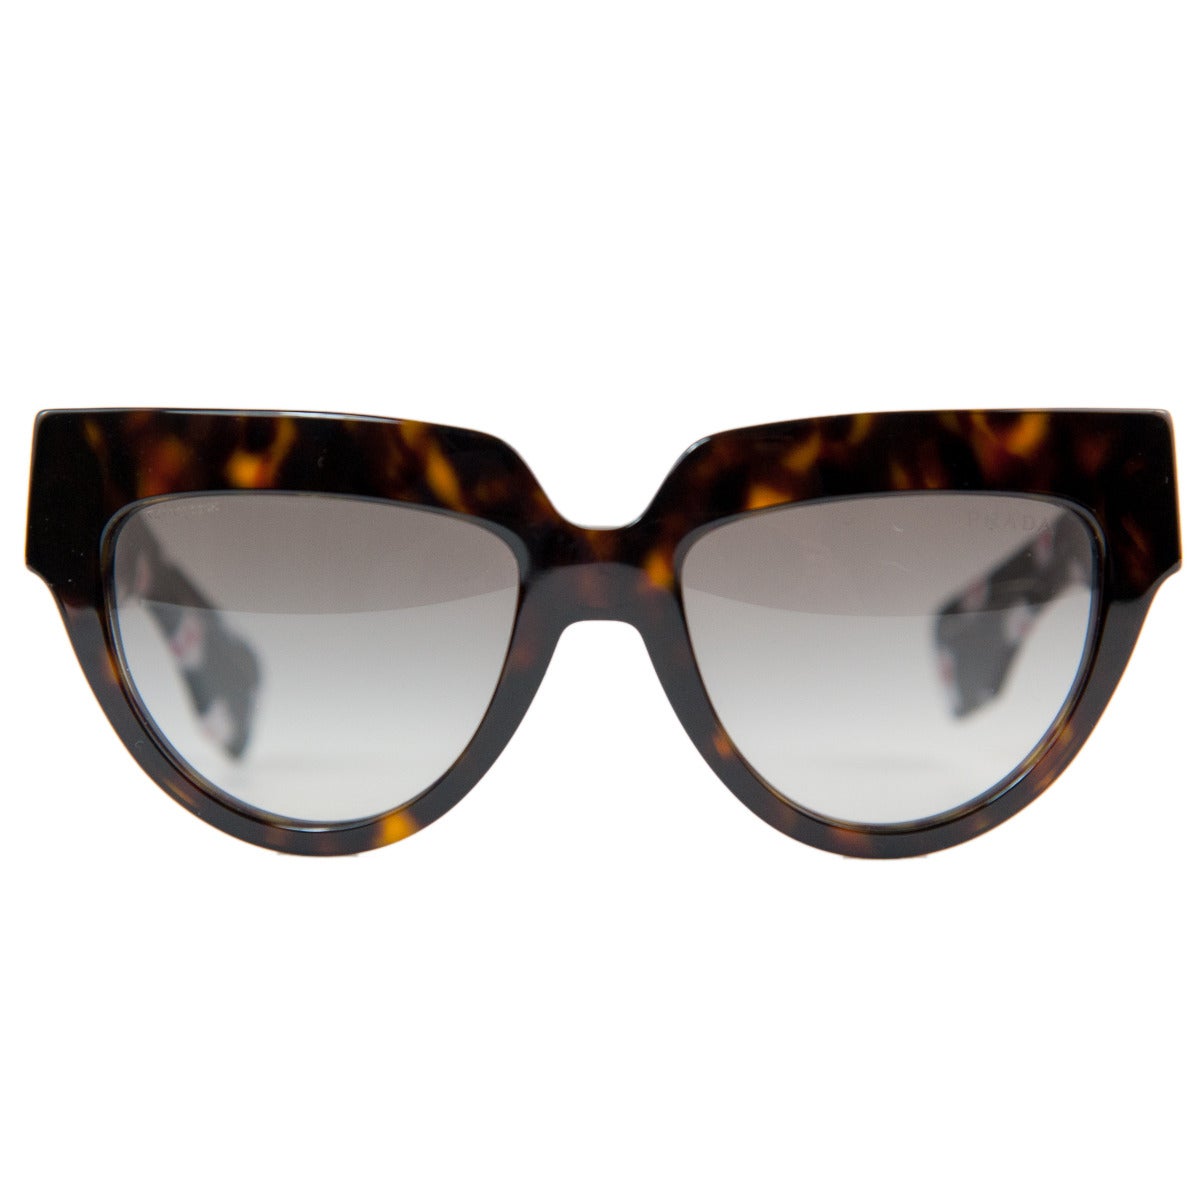 Beautiful and new Prada sunglasses
Black side color
Tortoise front
Internal printed flowers
Come with case
Made in Italy
Worldwide express shipping included in the price !